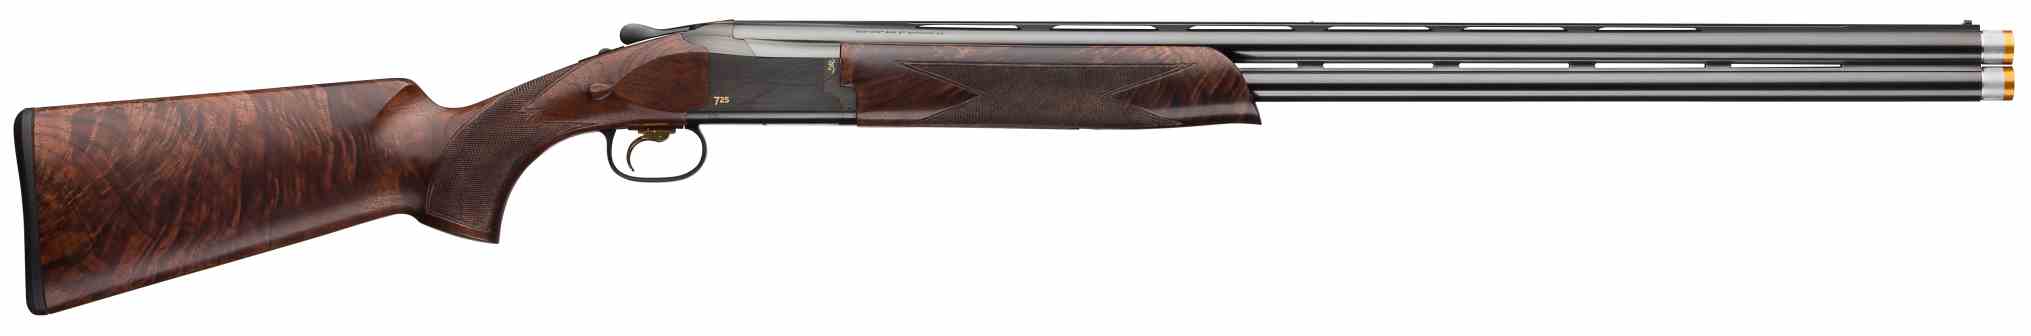 Browning Citori 725 S3 Sporting